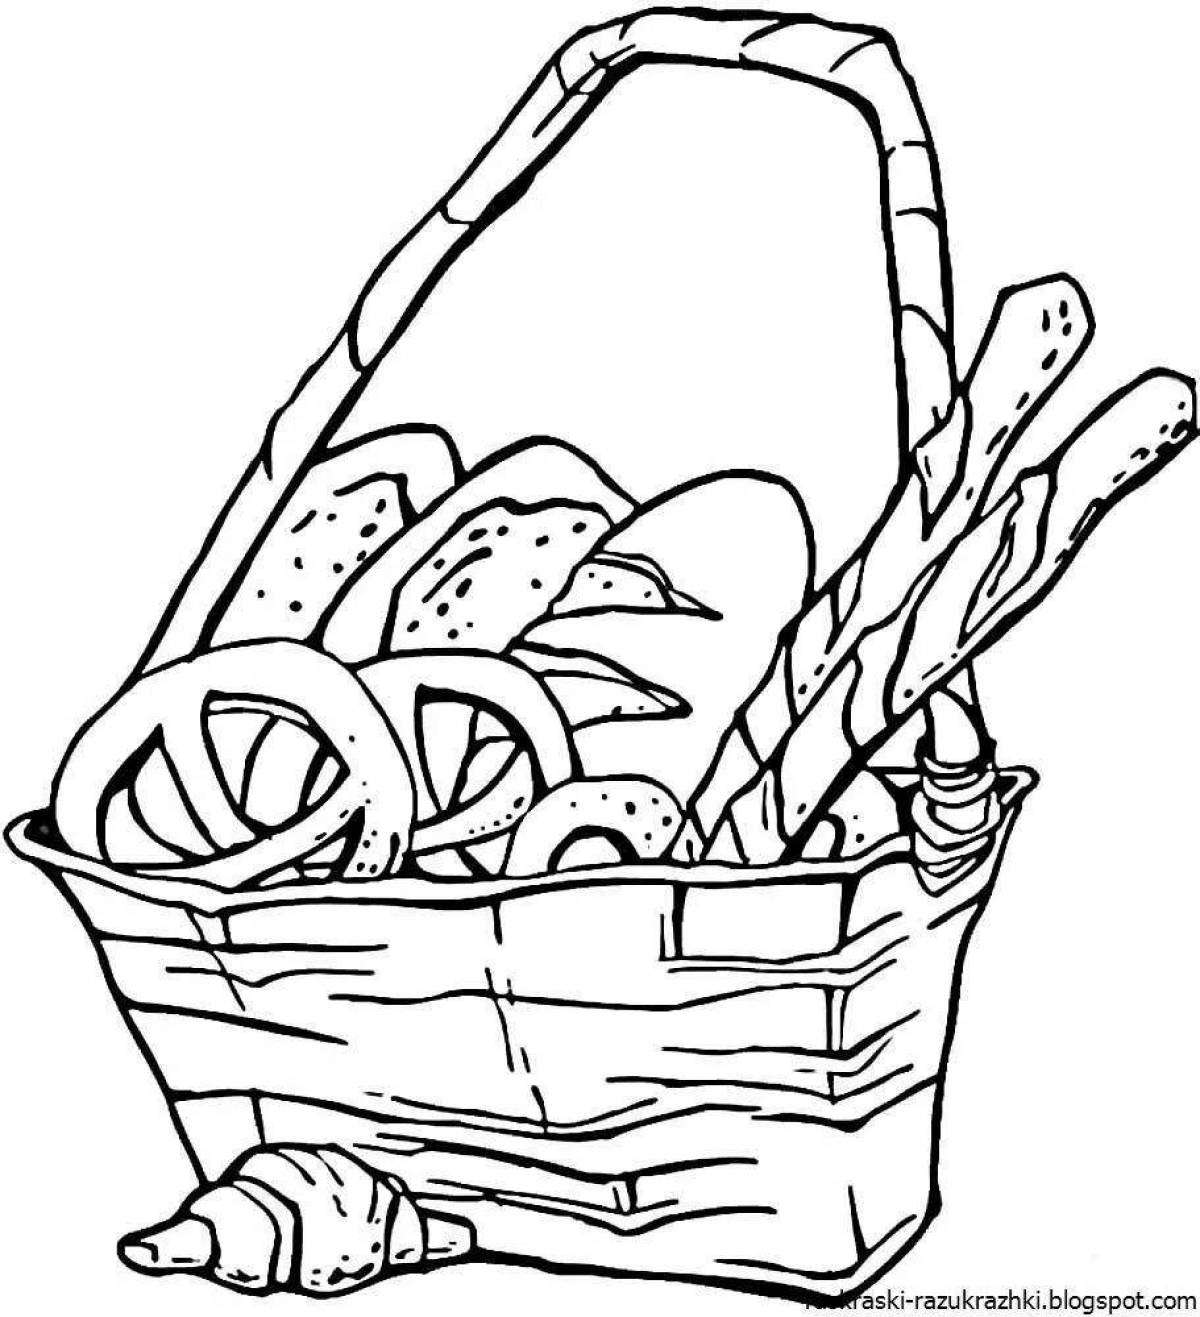 Exciting bakery coloring pages for kids